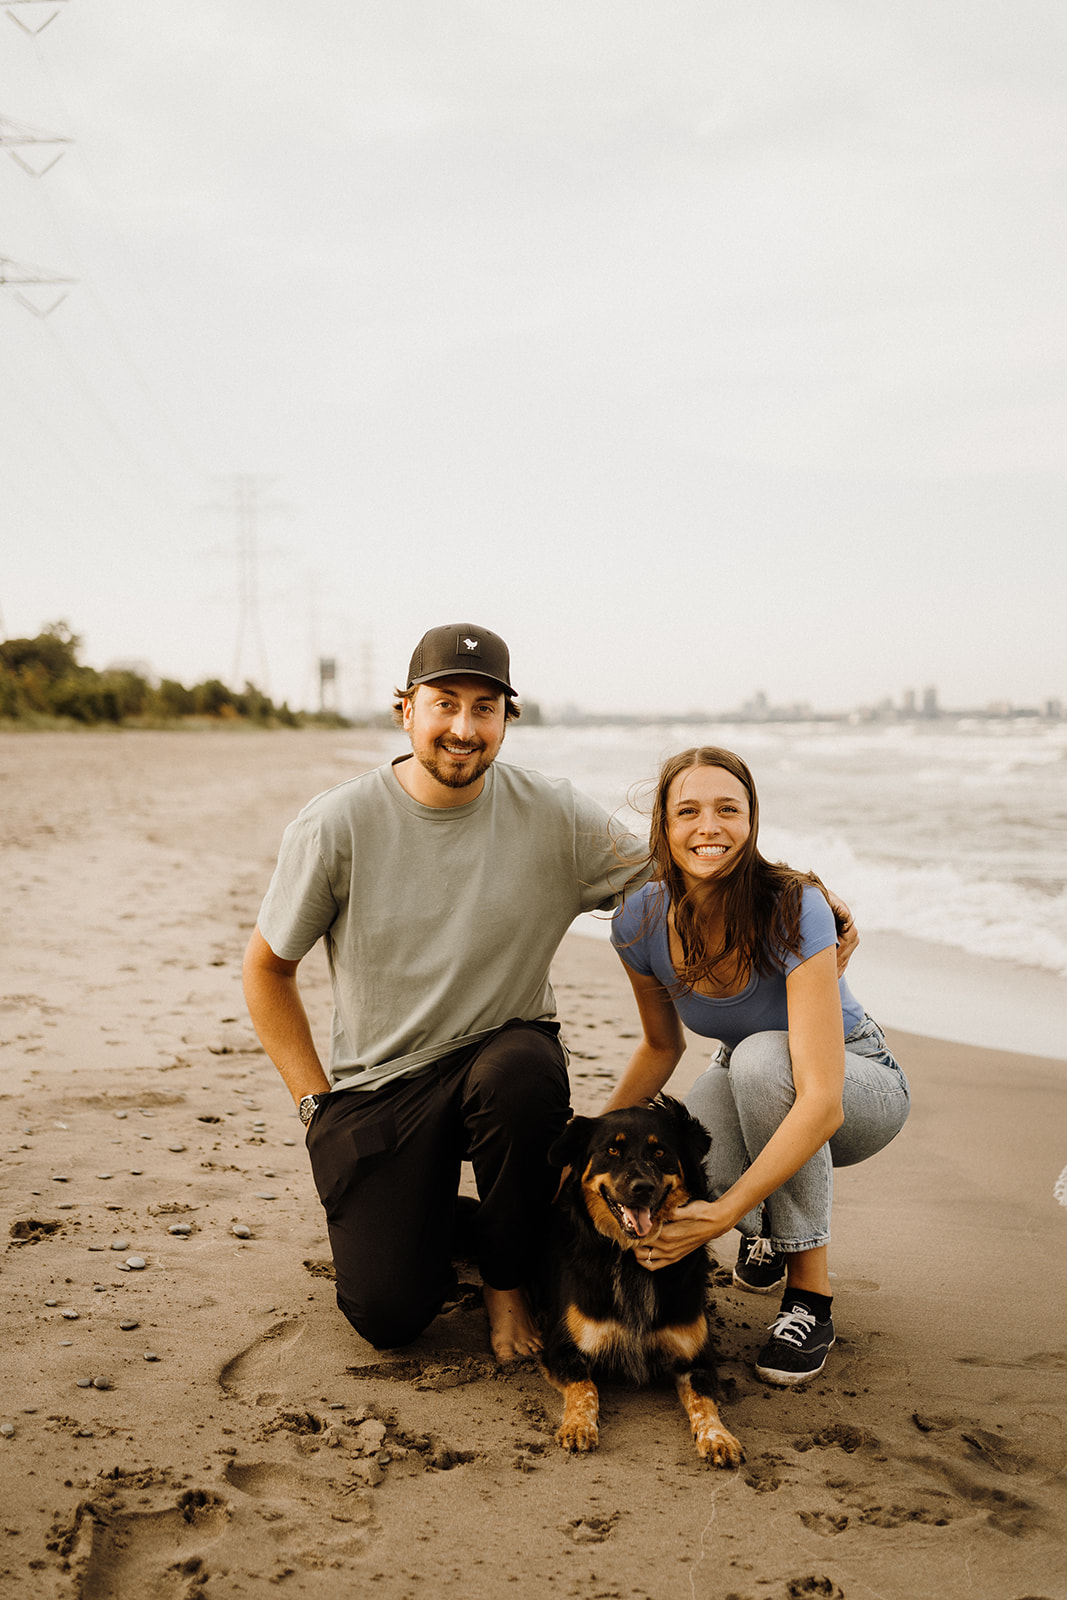 A man and woman sitting on the beach with their dog.